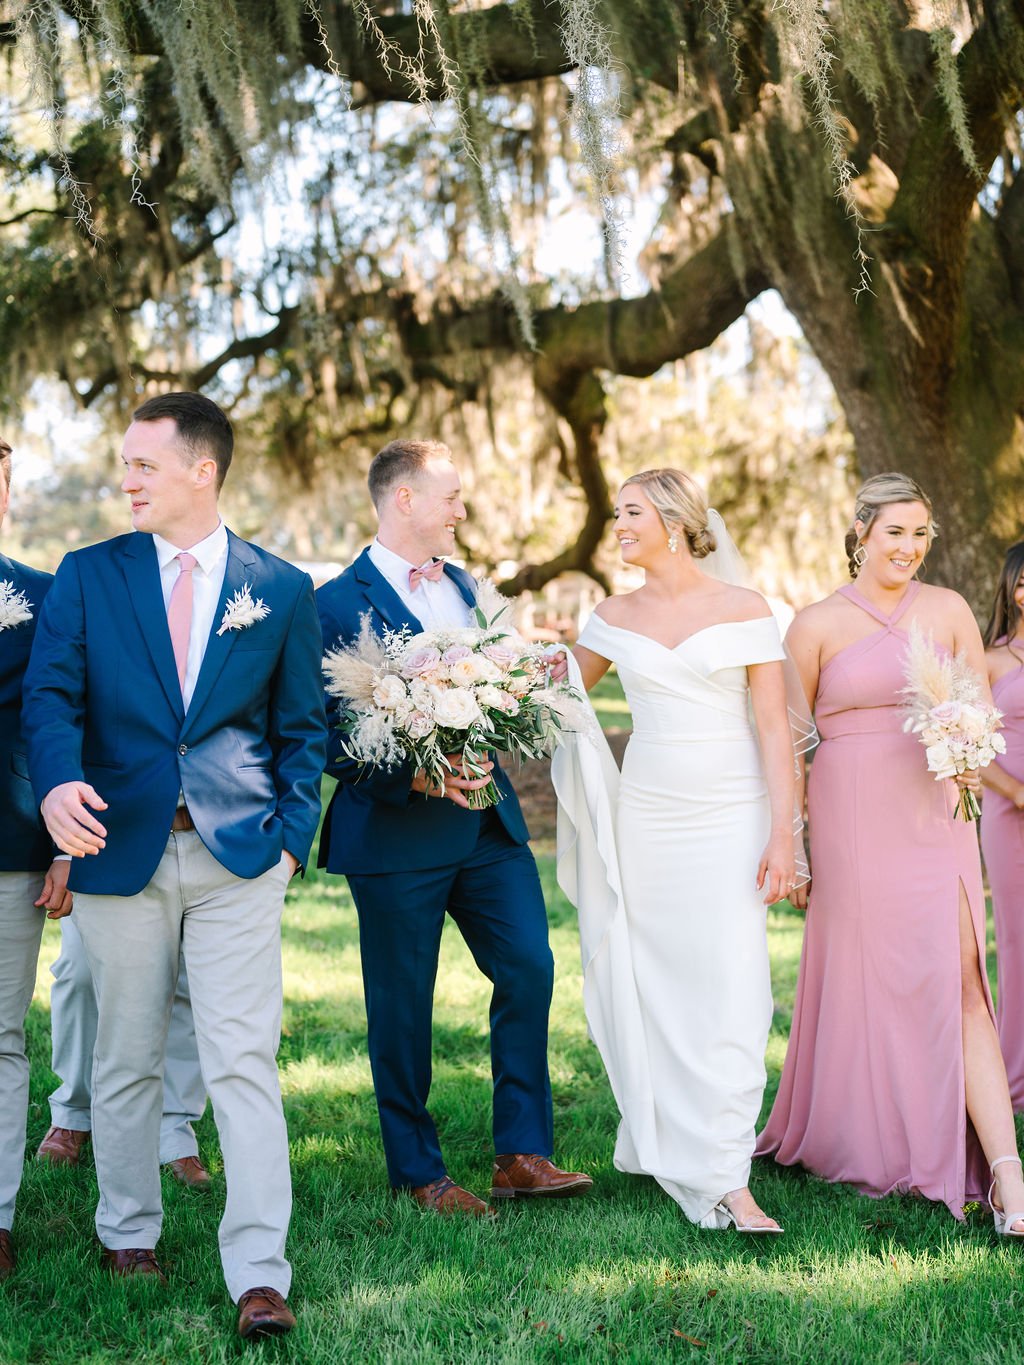 delaney-and-joshuas-real-savannah-wedding-at-red-gate-farms-planned-by-savannah-wedding-planner-ivory-and-beau-with-wedding-florals-from-savannah-wedding-florist-ivory-and-beau-shot-by-5d-photography-savannah-wedding-savannah-bride-5.jpg